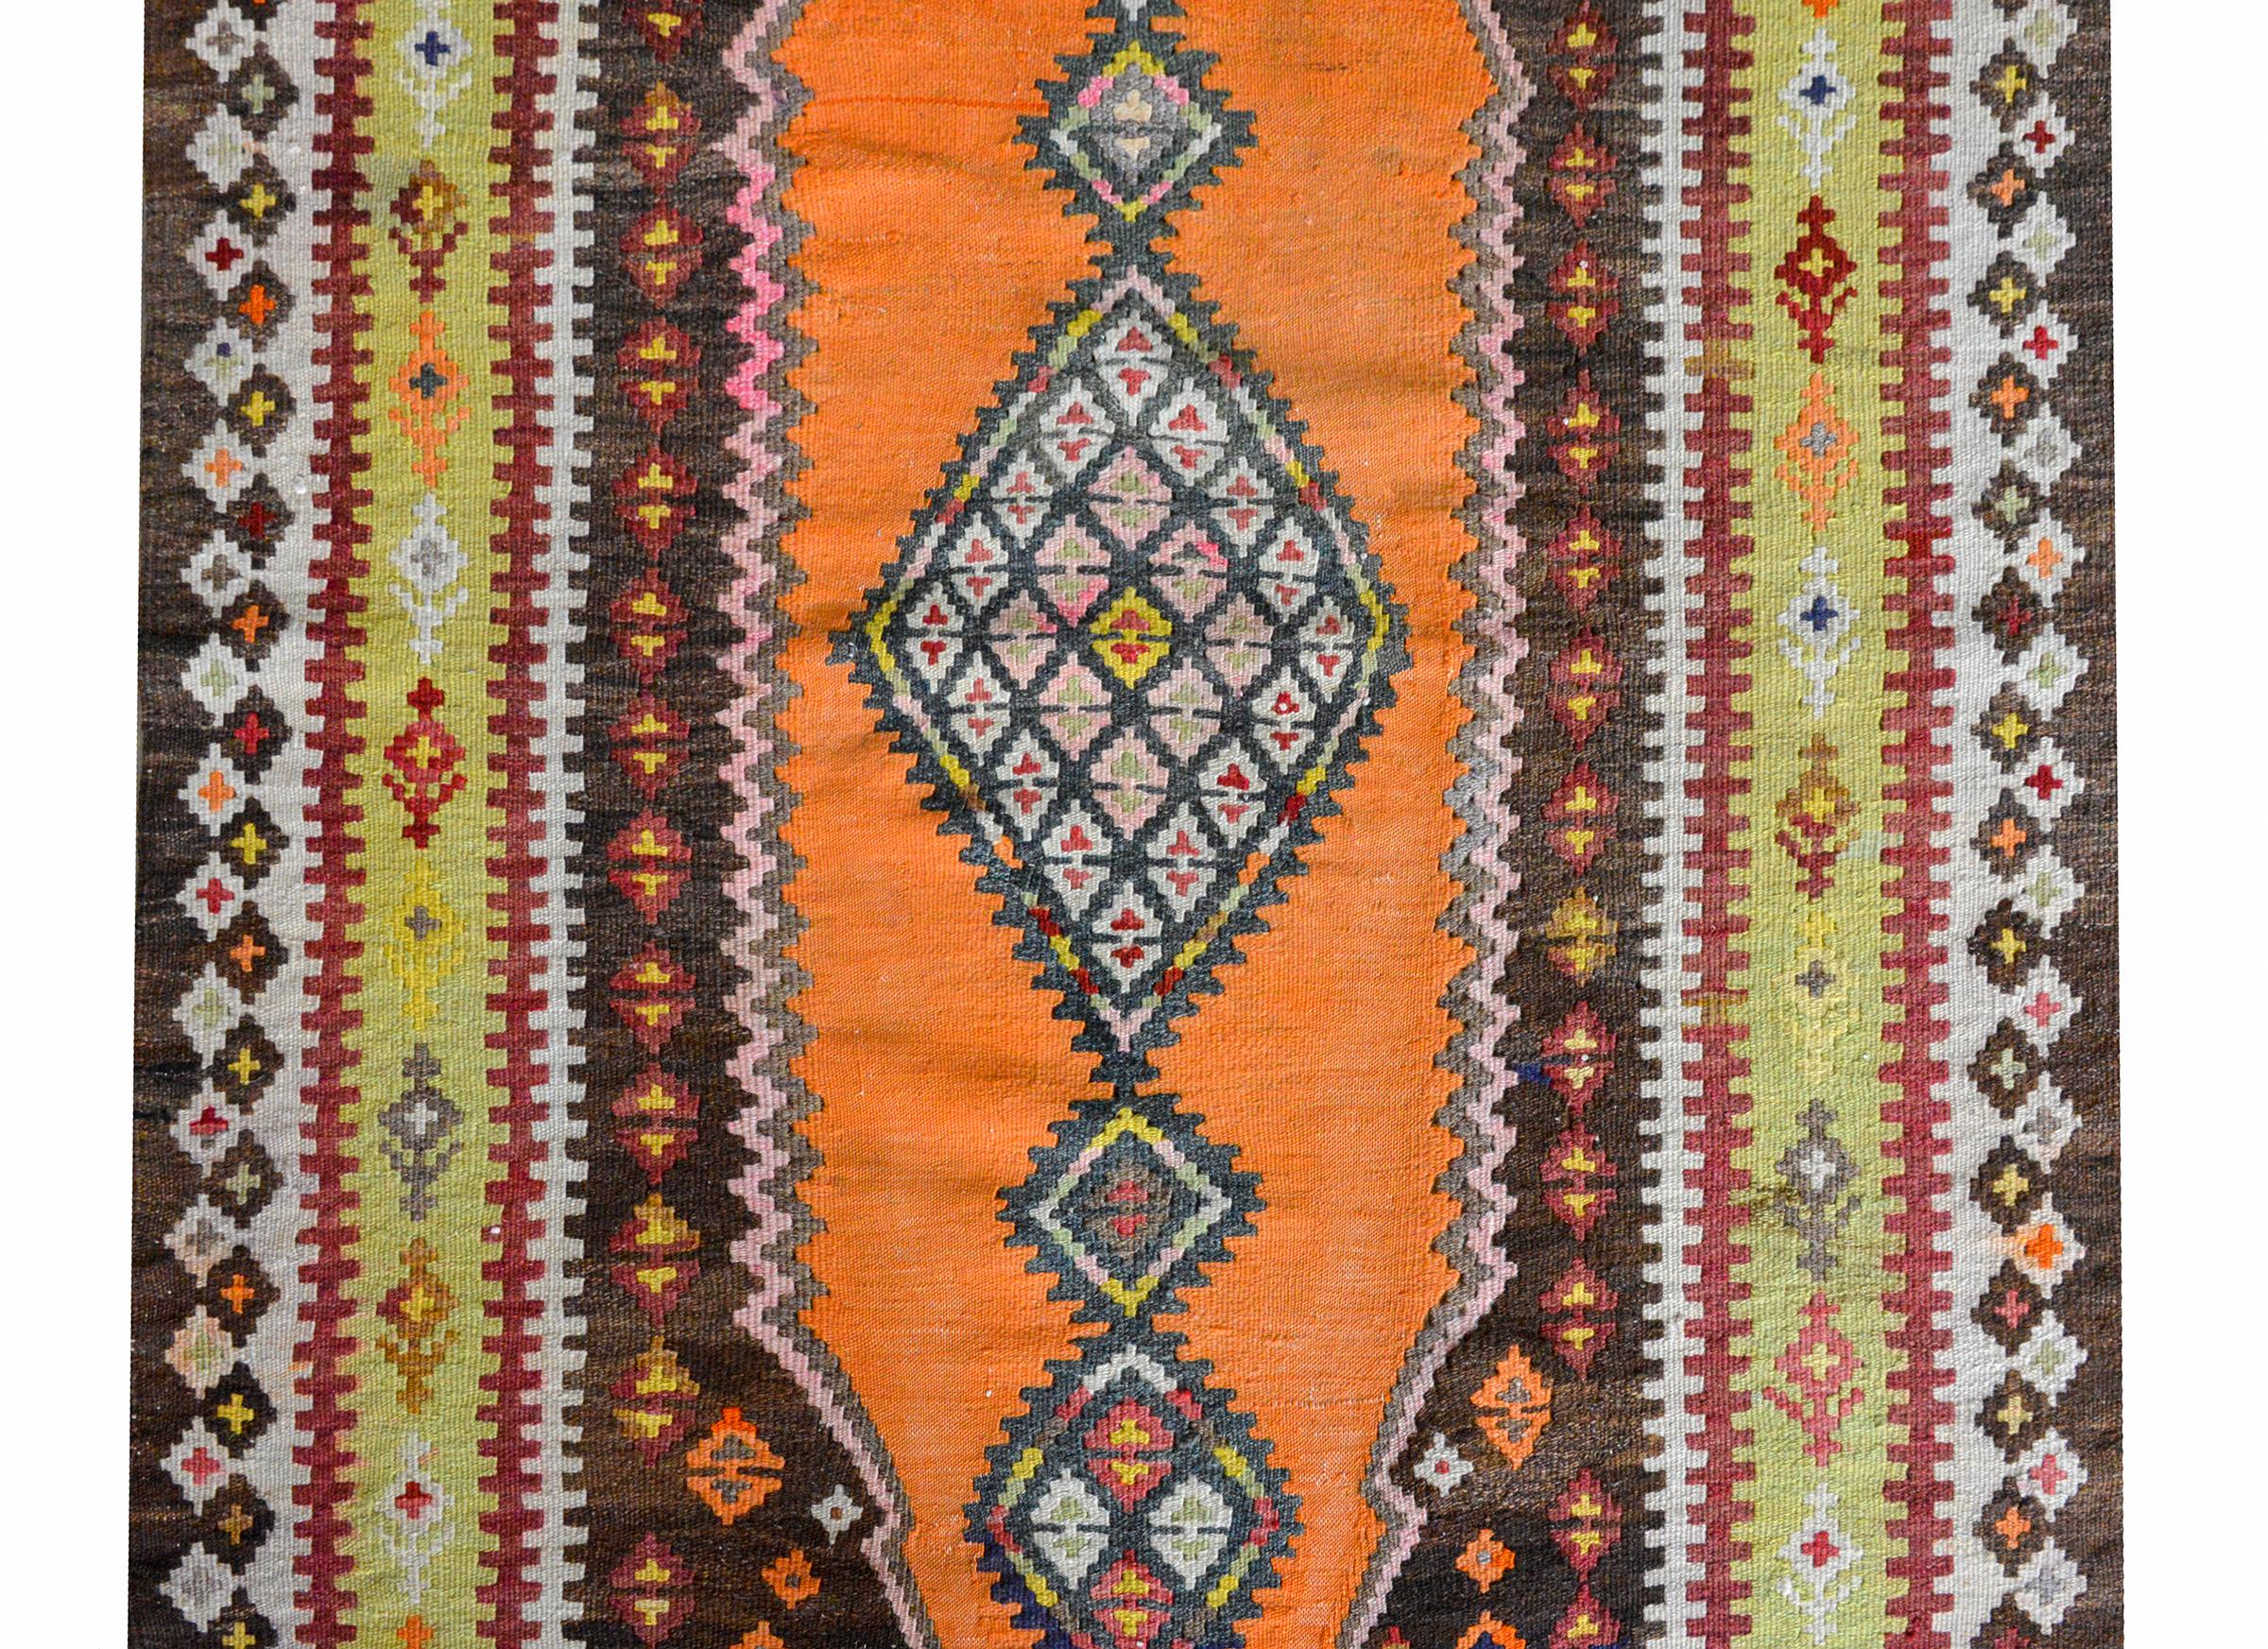 A wonderful early 20th century Persian Saveh Kilim rug with a tribal pattern containing multiple diamond motifs set against an orange background, and surrounded by a wide border composed with multiple floral and geometric pattered stripes.